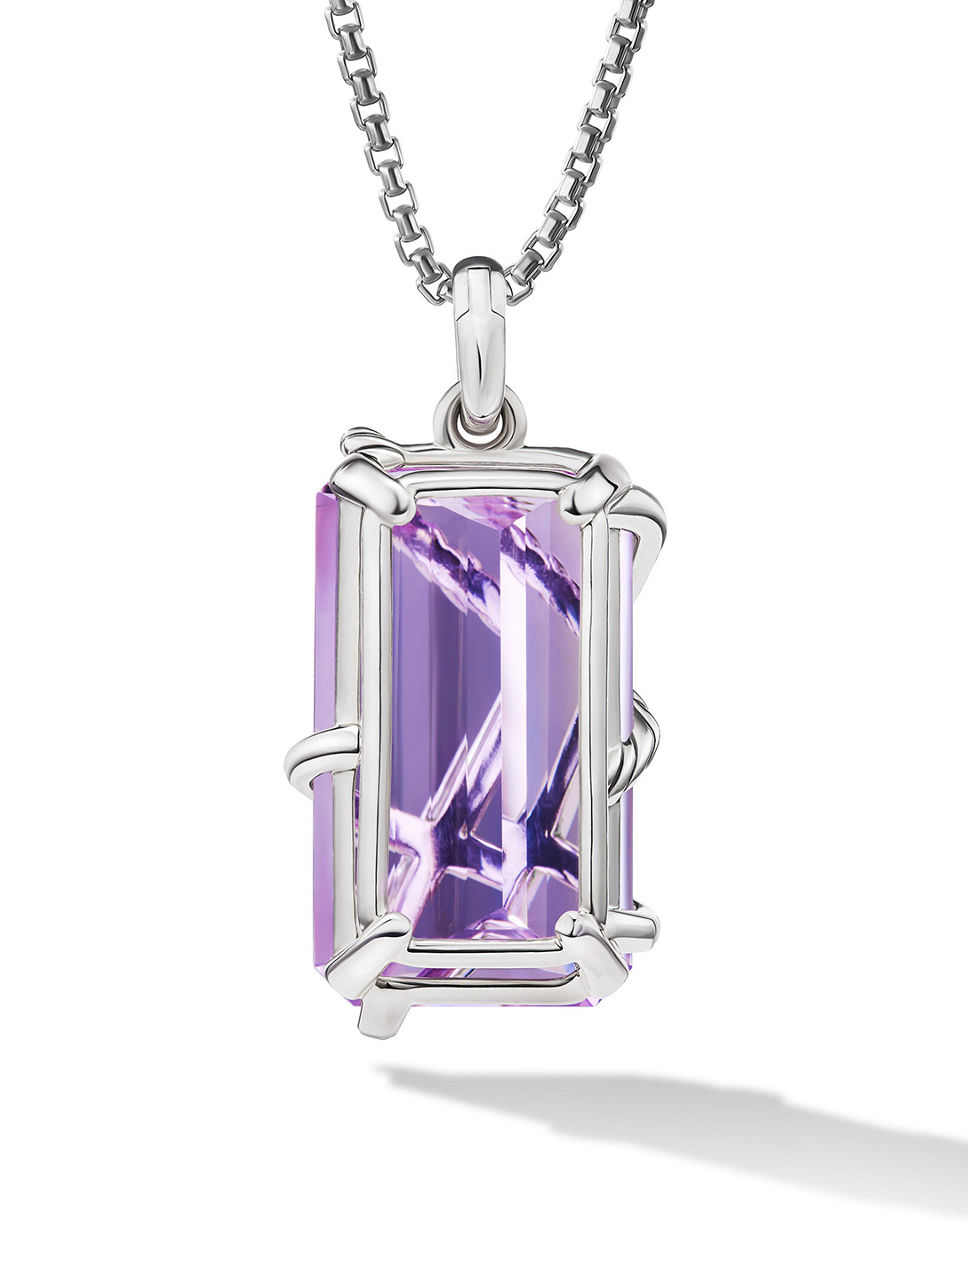 Cable Wrap Amulet In Sterling Silver With Lavender Amethyst And Diamonds, 31mm